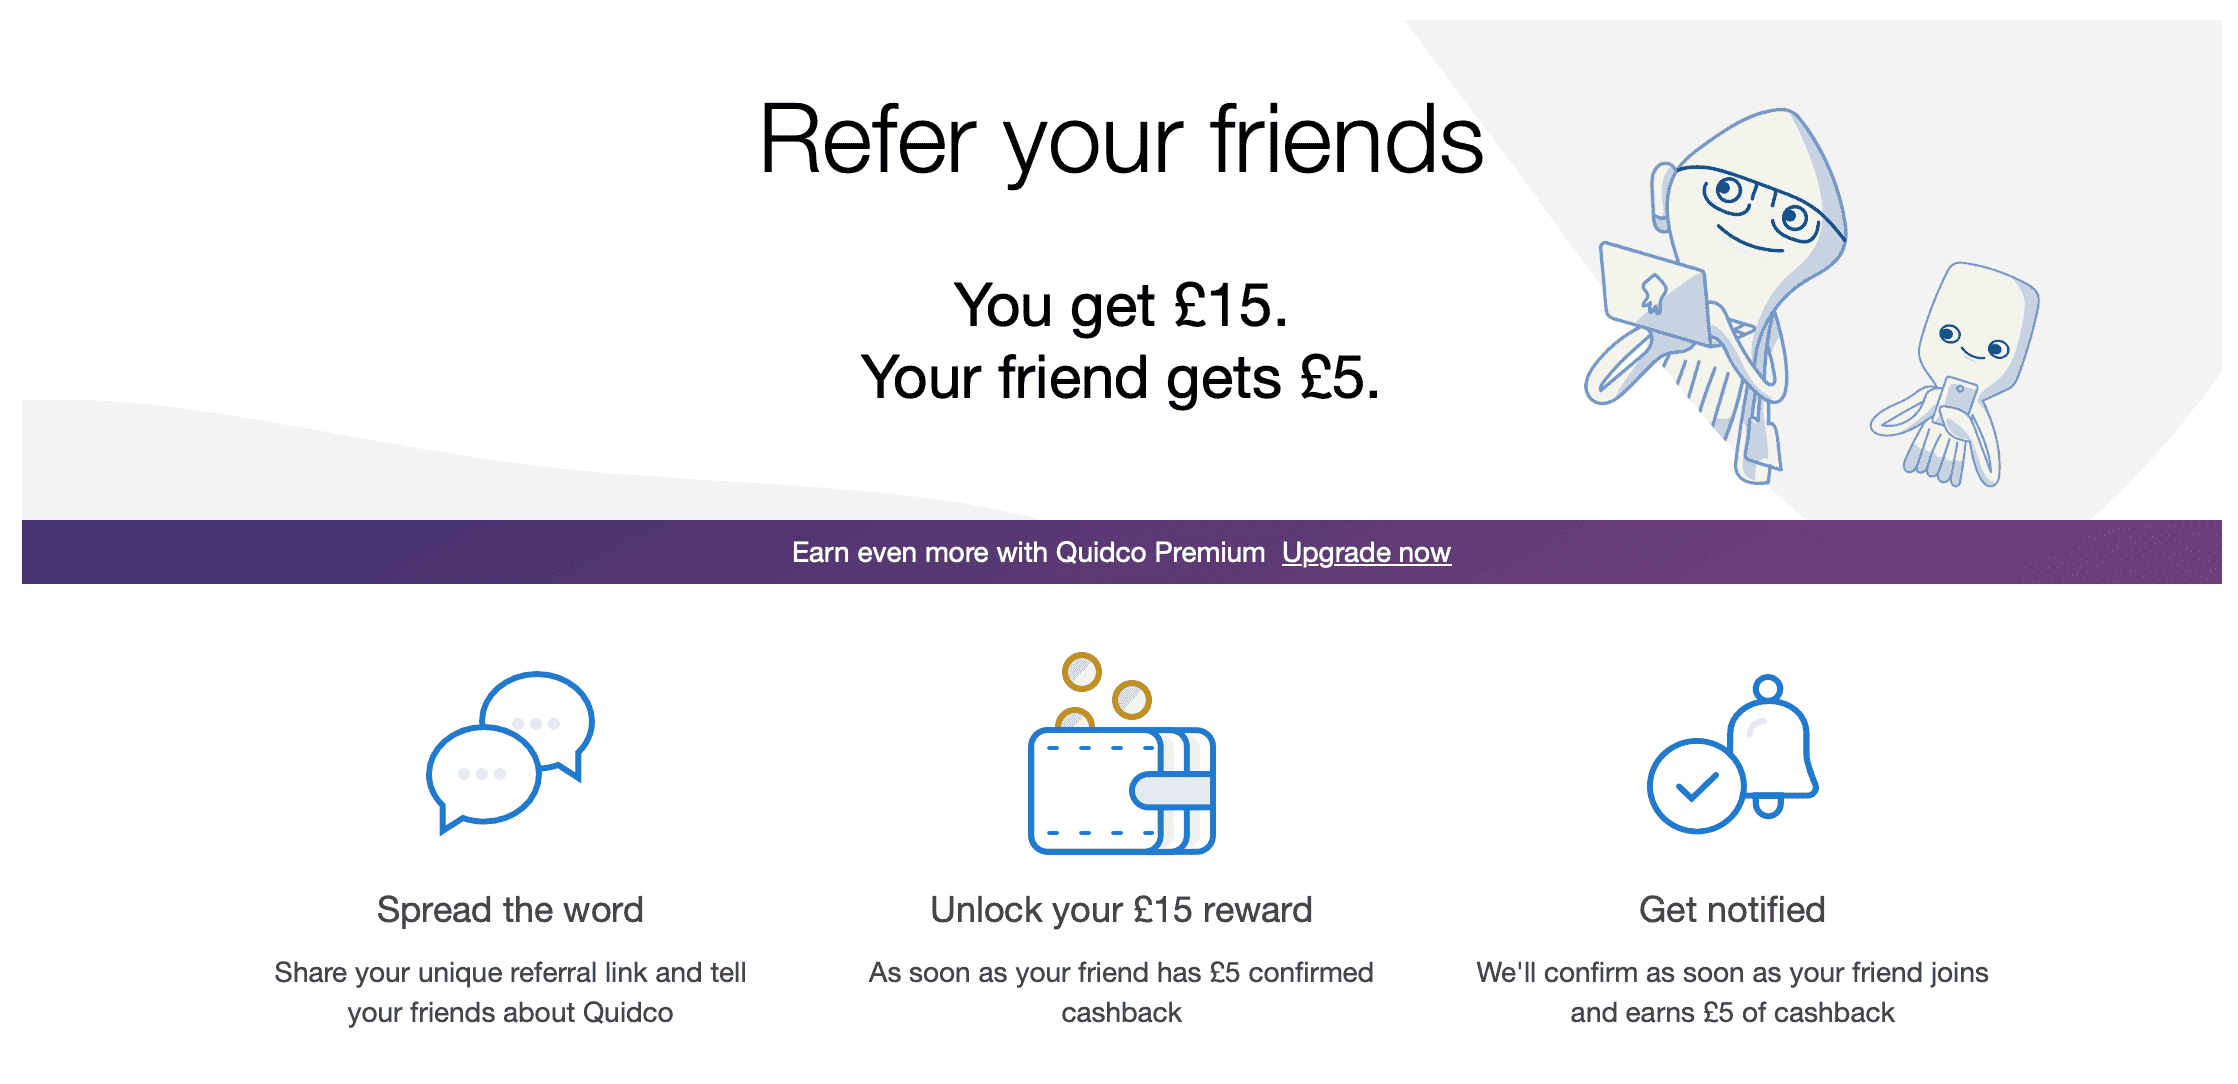 Refer your friends. You get £15. Your friend gets £5.